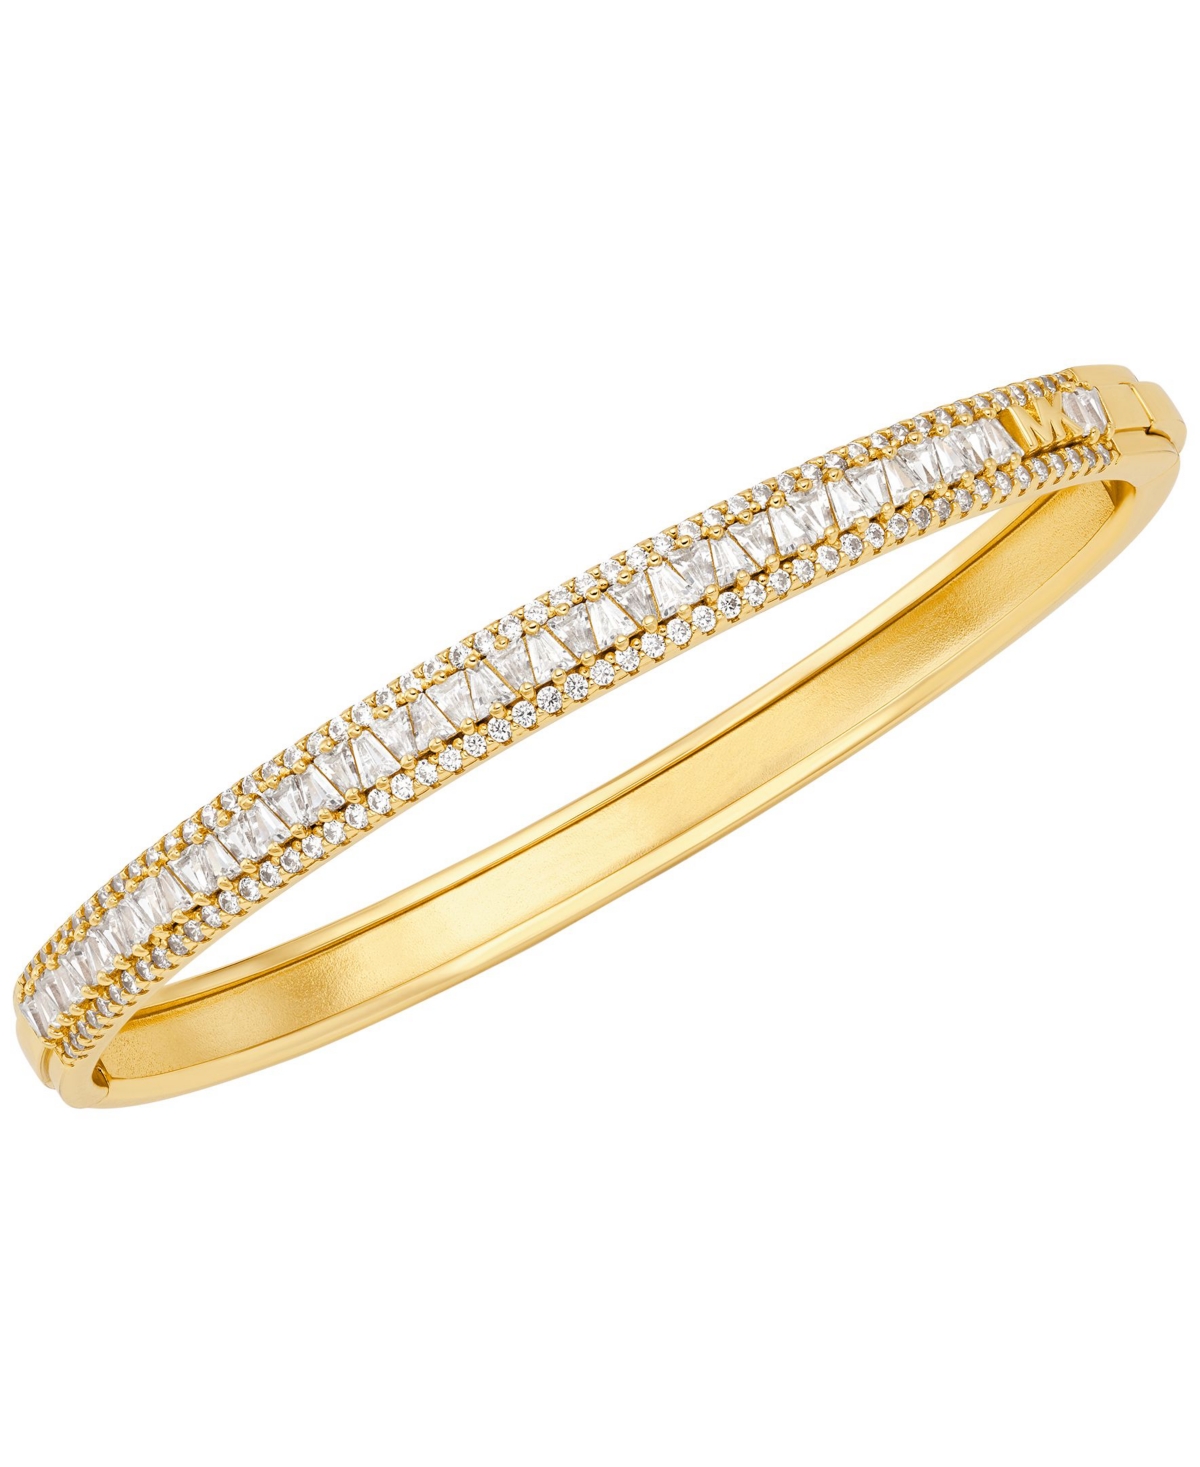 Michael Kors Tapered Baguette And Pave Bangle Bracelet In Gold